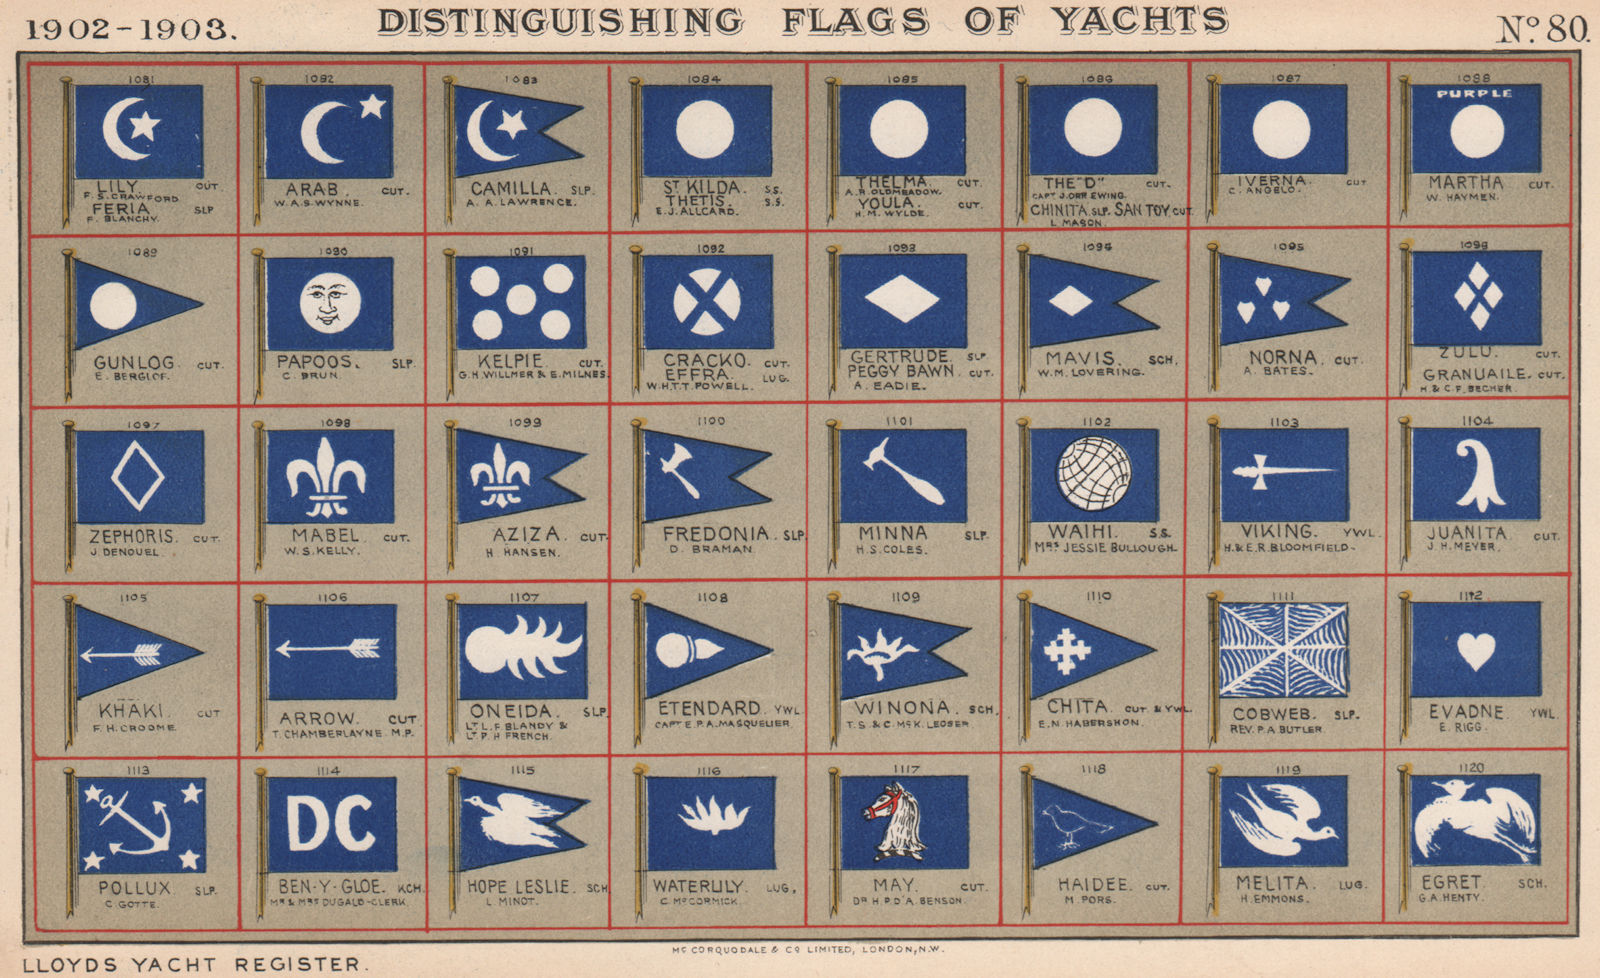 YACHT FLAGS. Blue & White (7) 1902 old antique vintage print picture